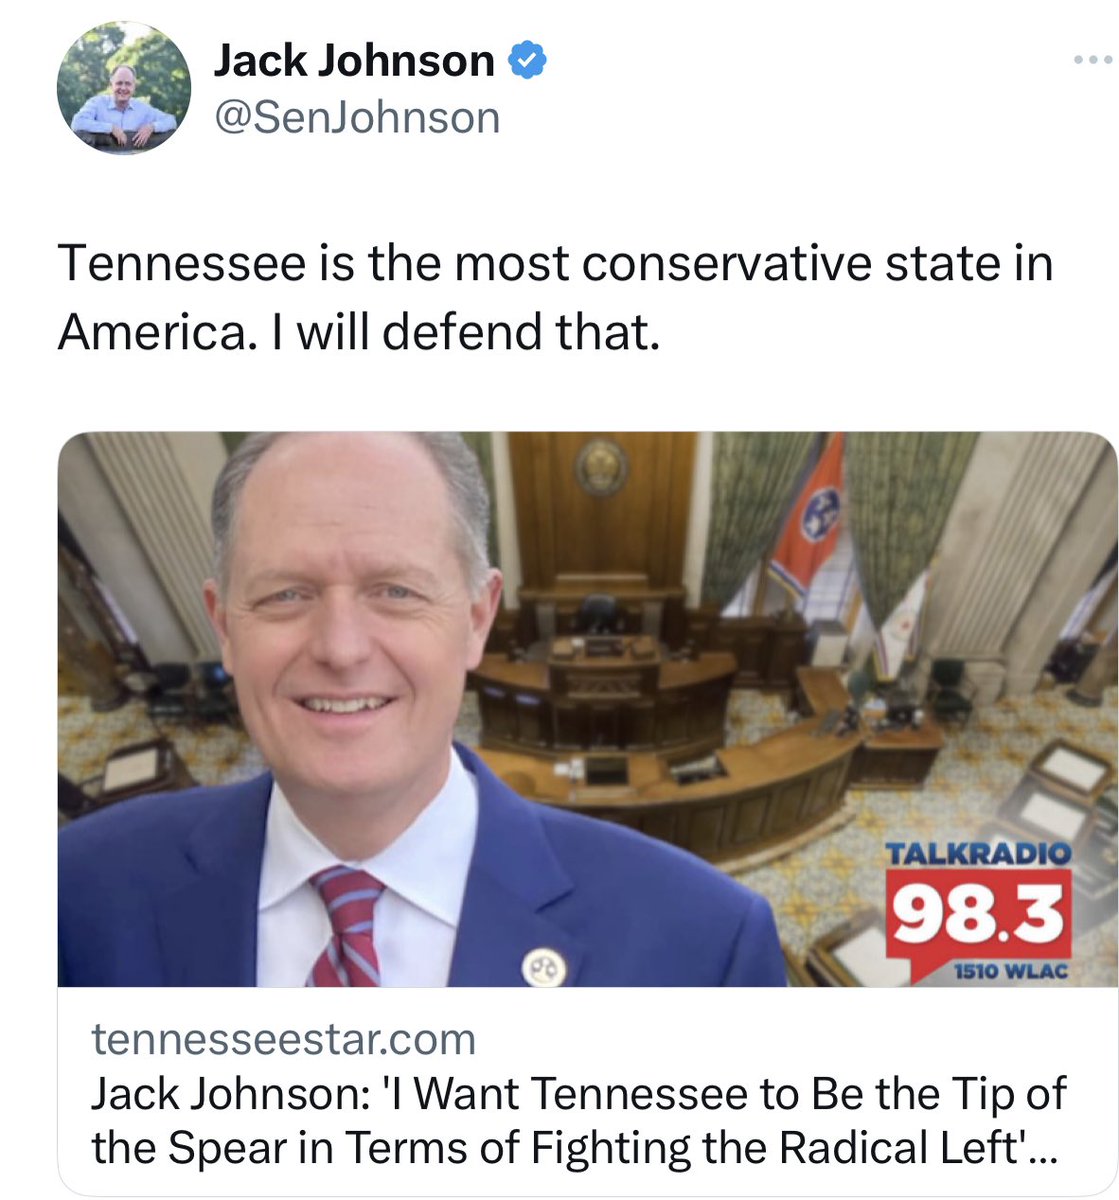 Here’s the thing — Jack isn’t wrong. TN is a theocracy controlled by a radical GOP supermajority that passes the most anti-🏳️‍🌈 bills, strictest abortion ban, strangles democracy, etc

What they get away with here, they export to the rest of 🇺🇸. Help TN, or it comes your way next.